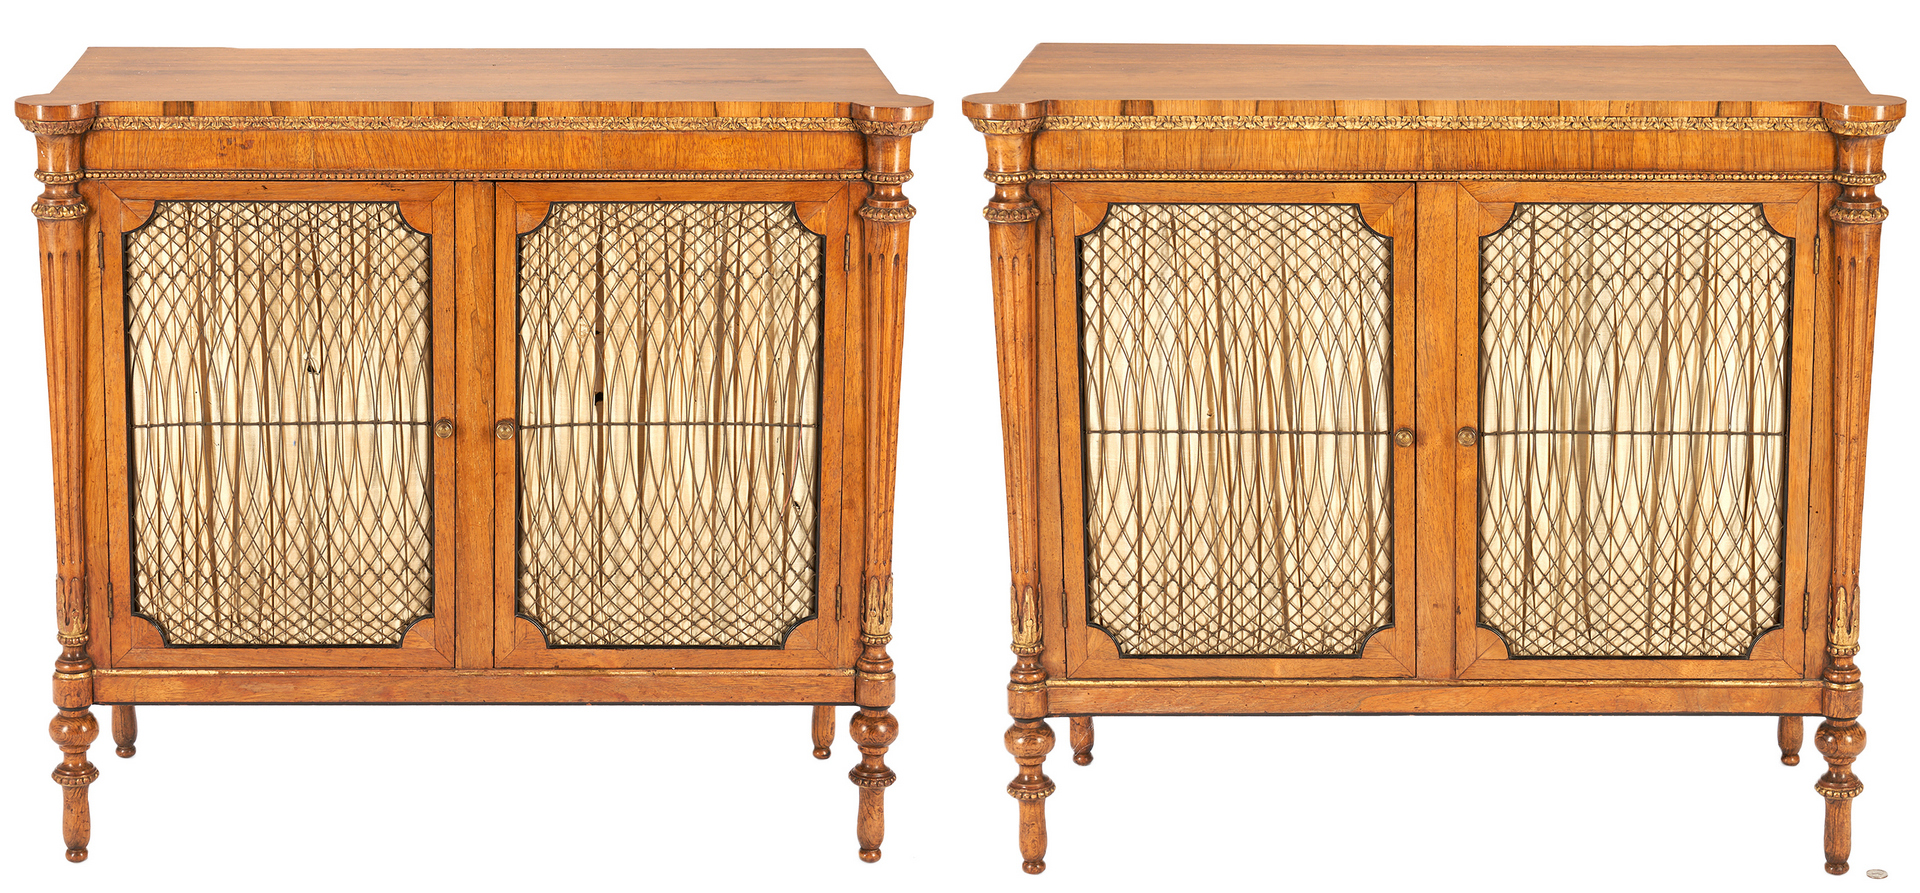 Lot 154: Pair Louis XVI Style Bibliotheque Cabinets